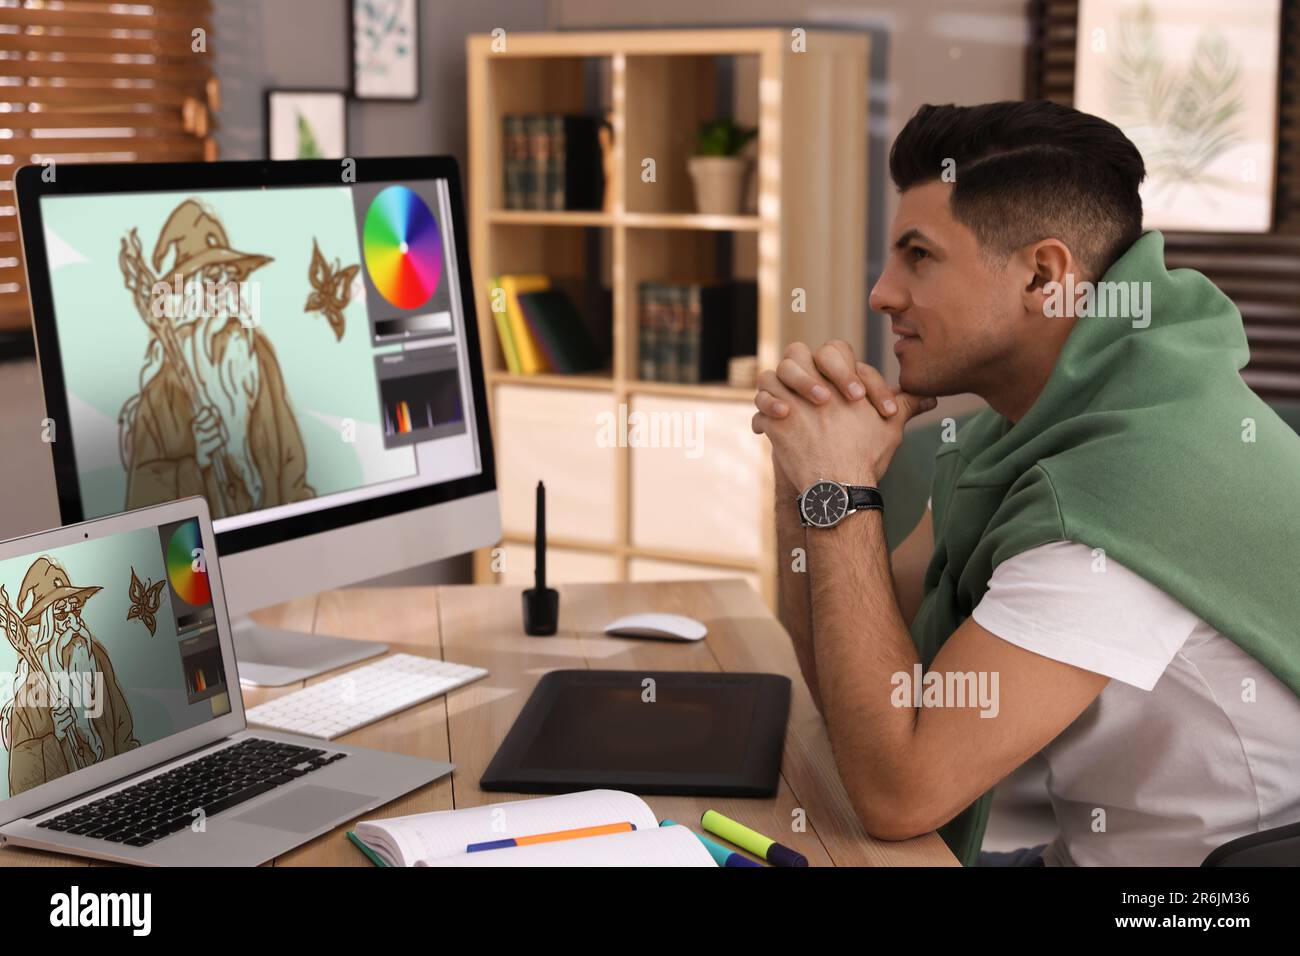 Animator working with computer and laptop. Illustrations on screens Stock Photo